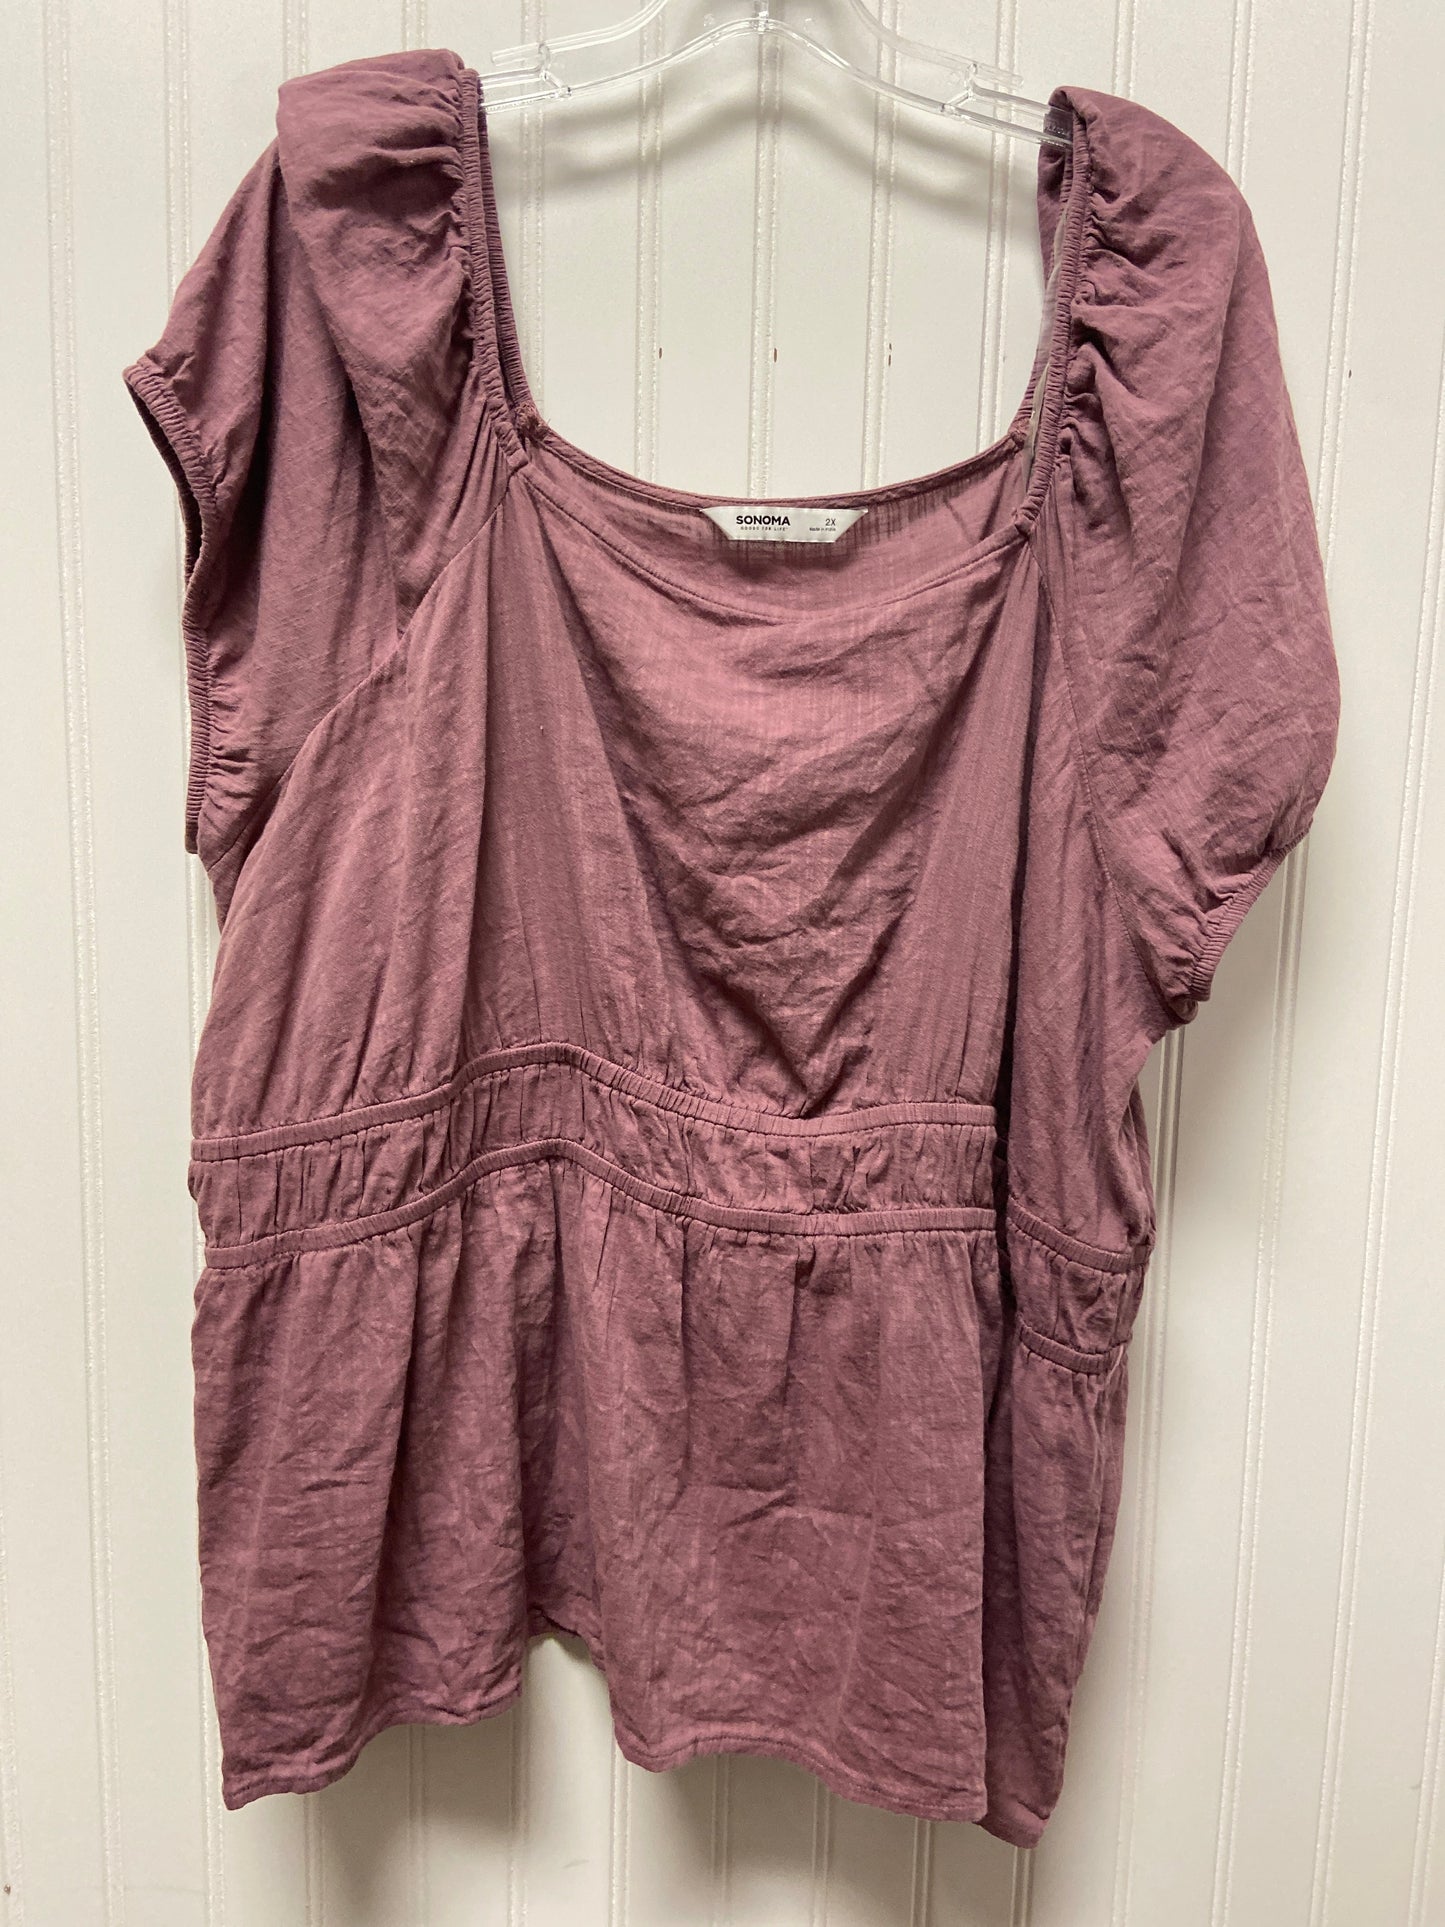 Pink Top Short Sleeve Sonoma, Size 2x